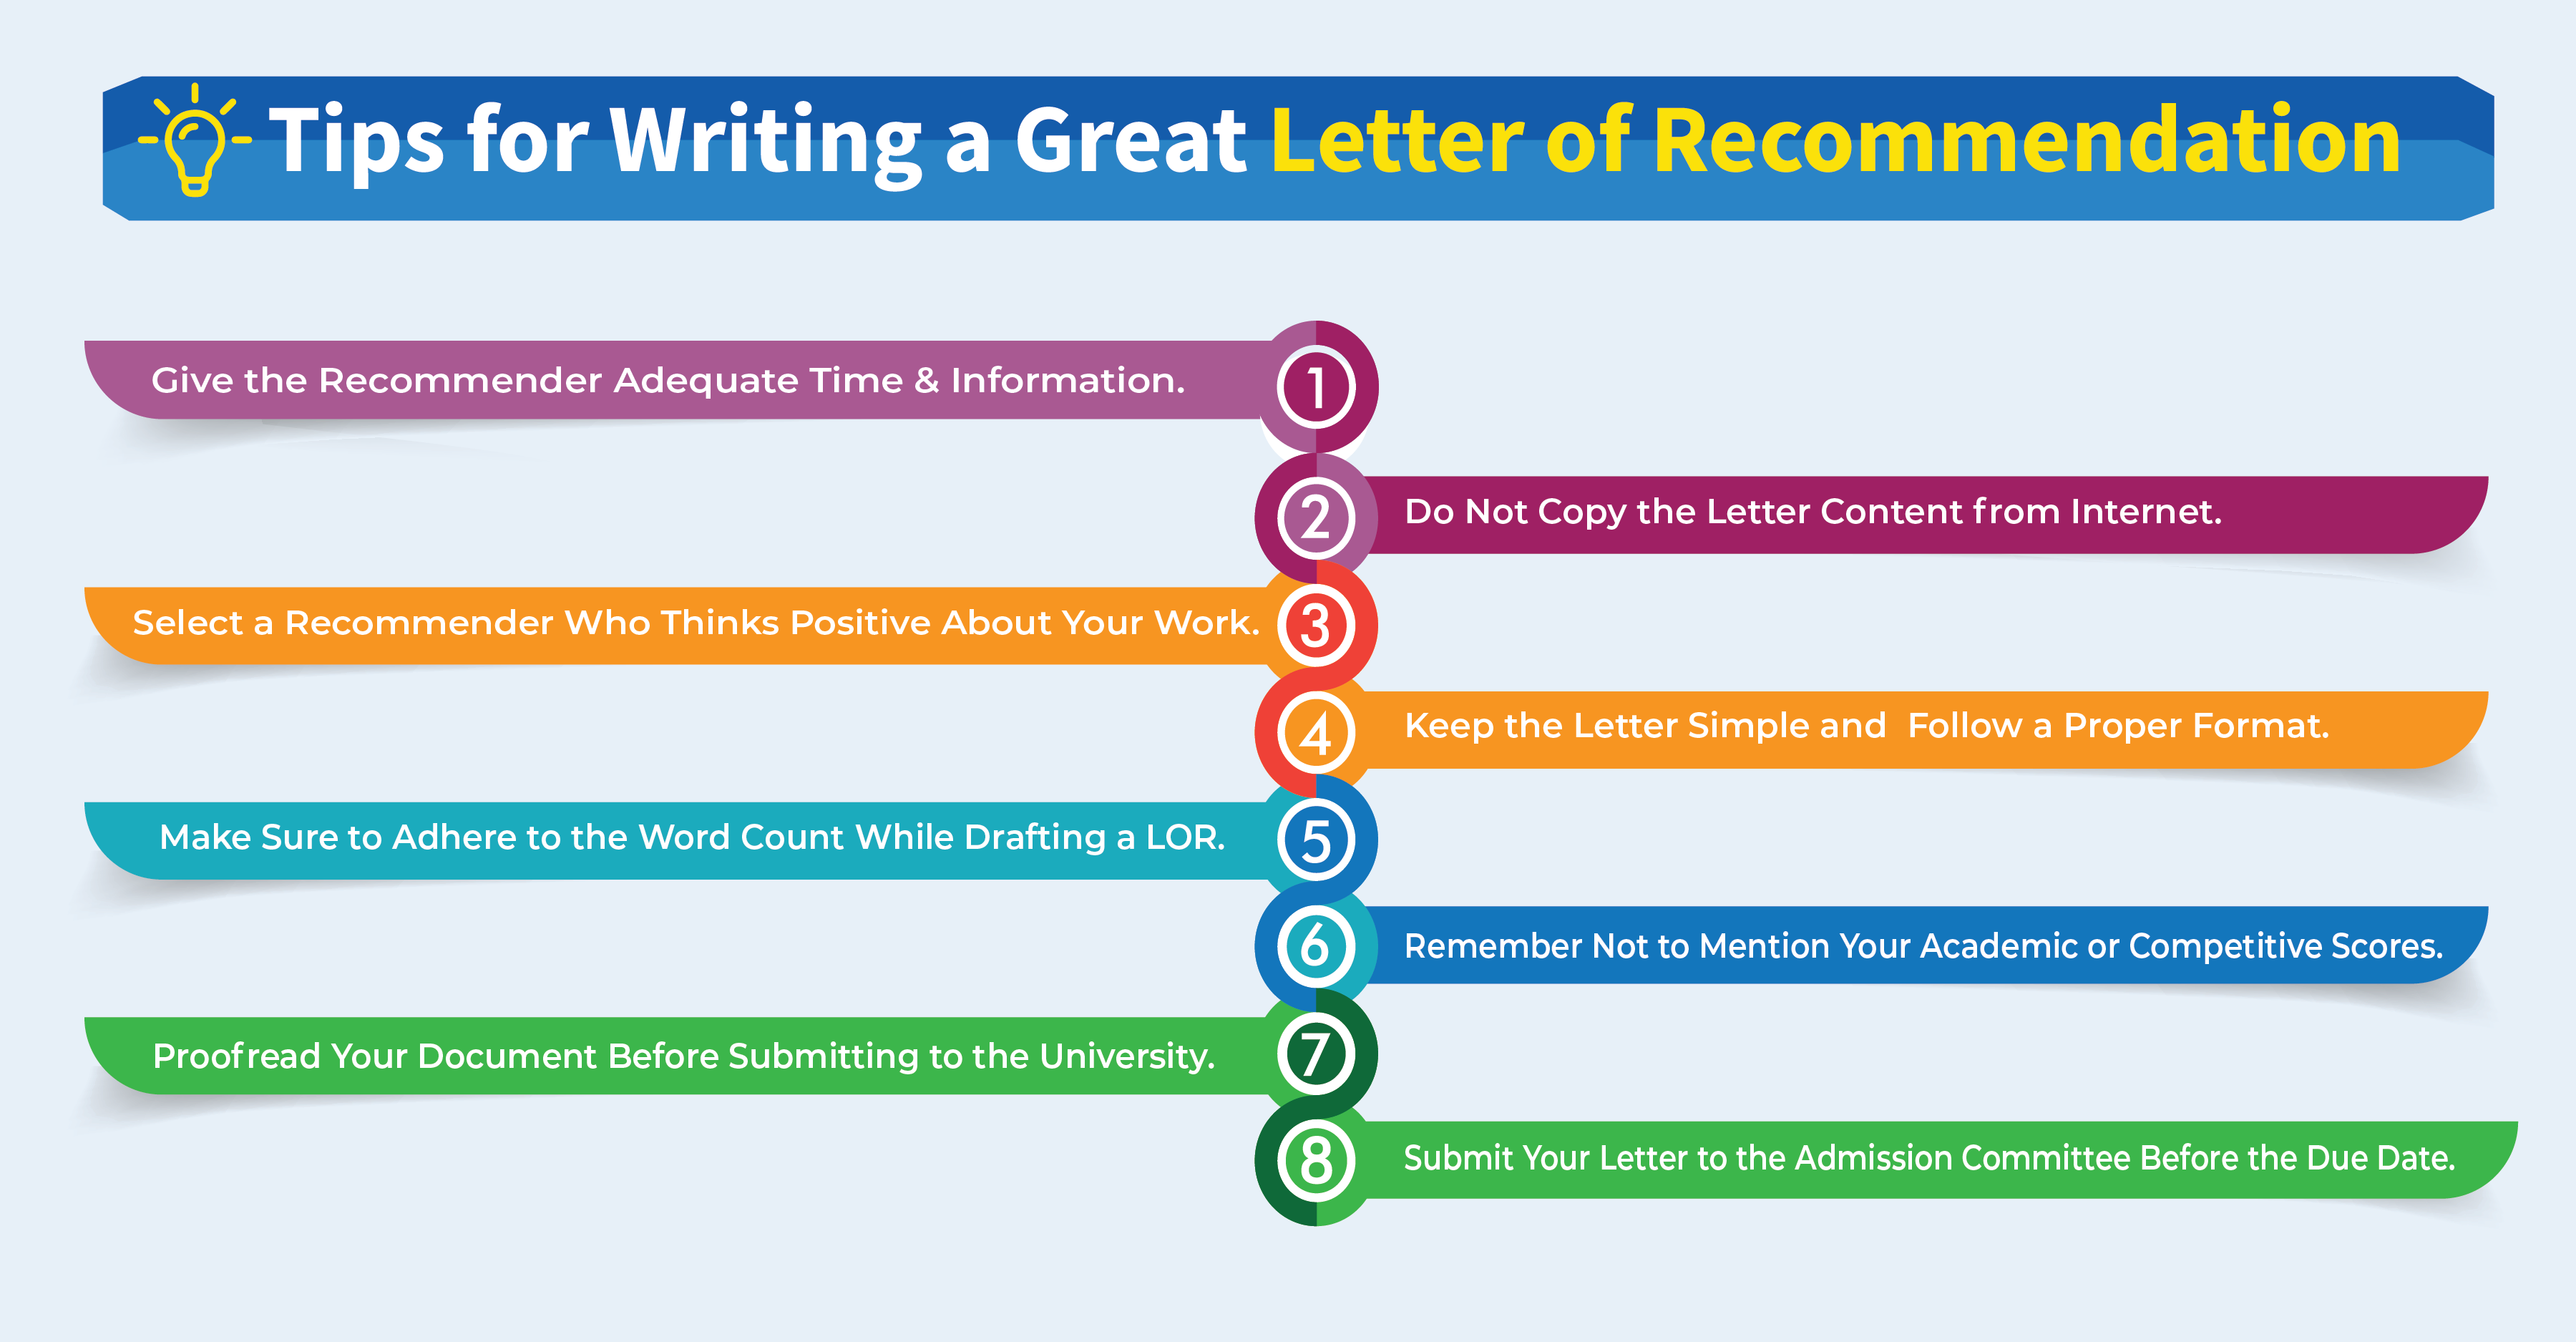 Here are the Quick Tips by Gradding.com for Writing a LOR